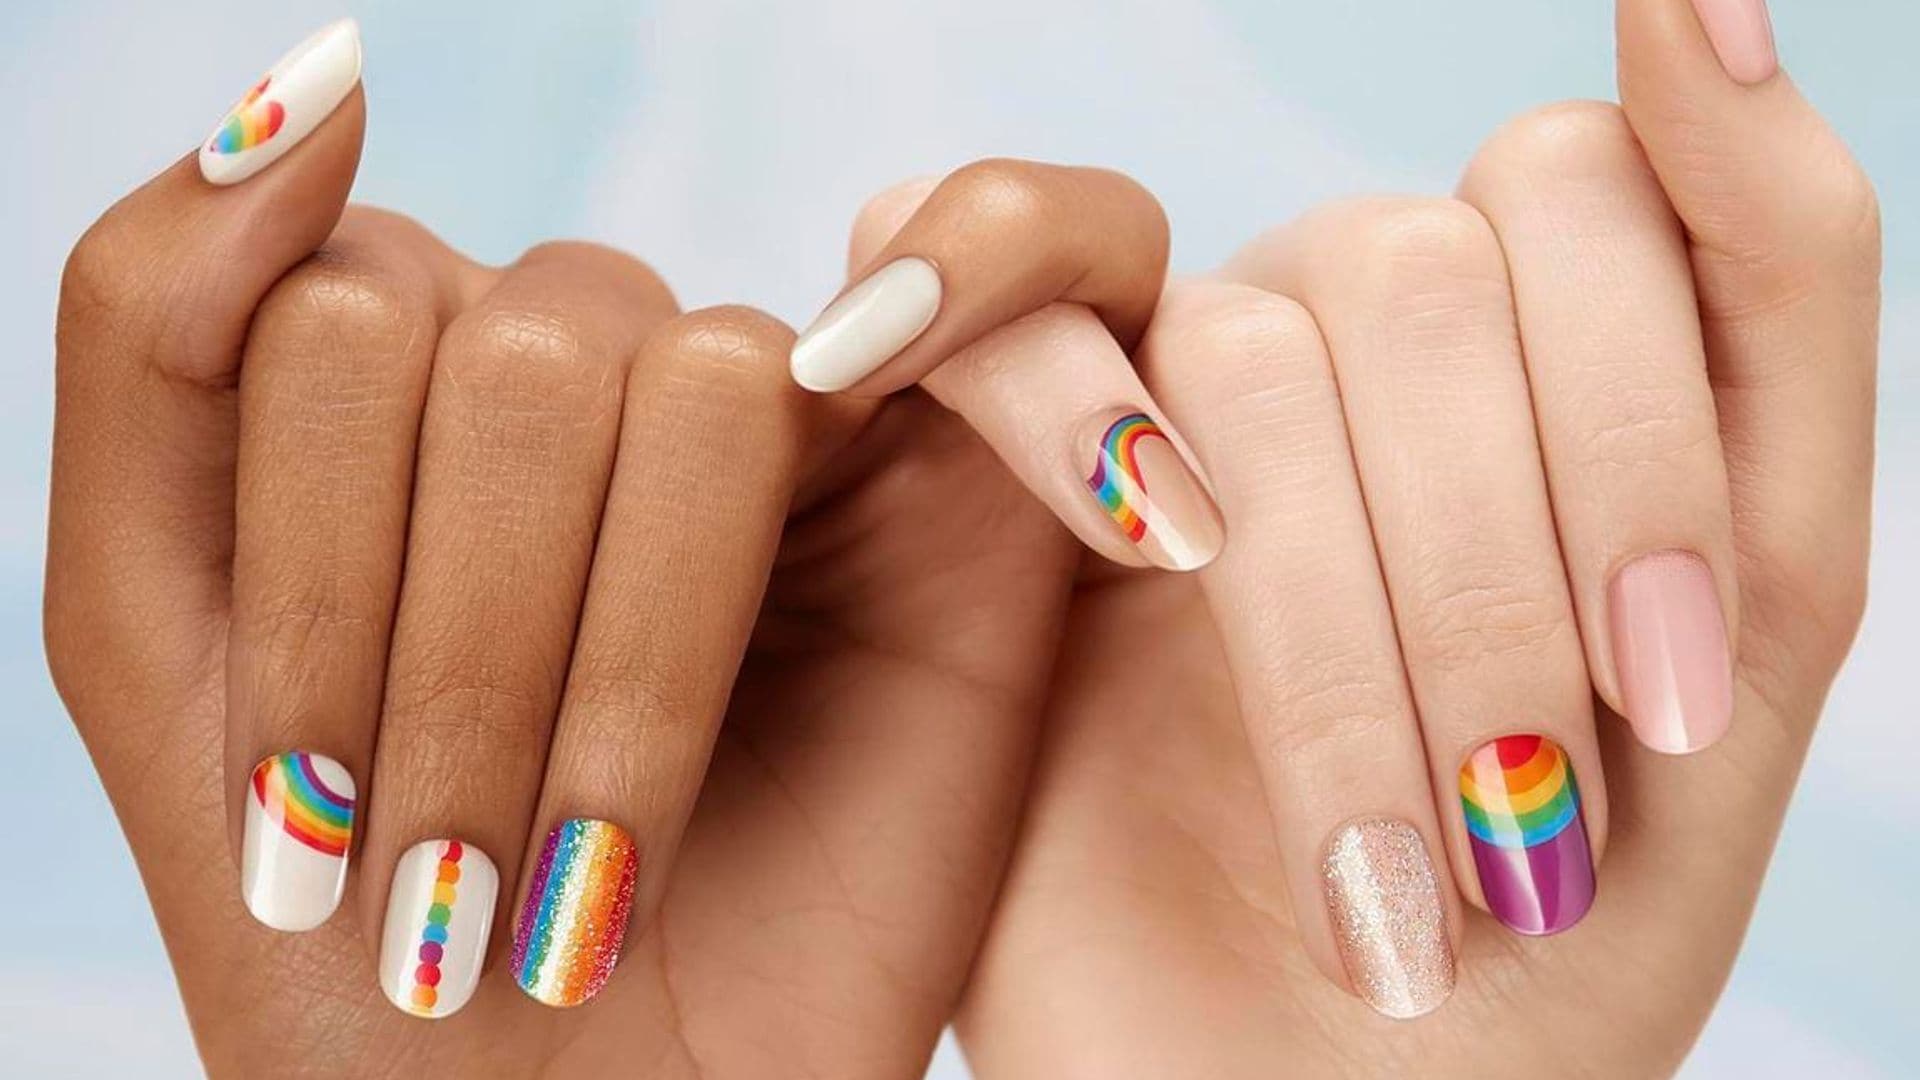 6 rainbow-inspired beauty products to make you feel empowered this month